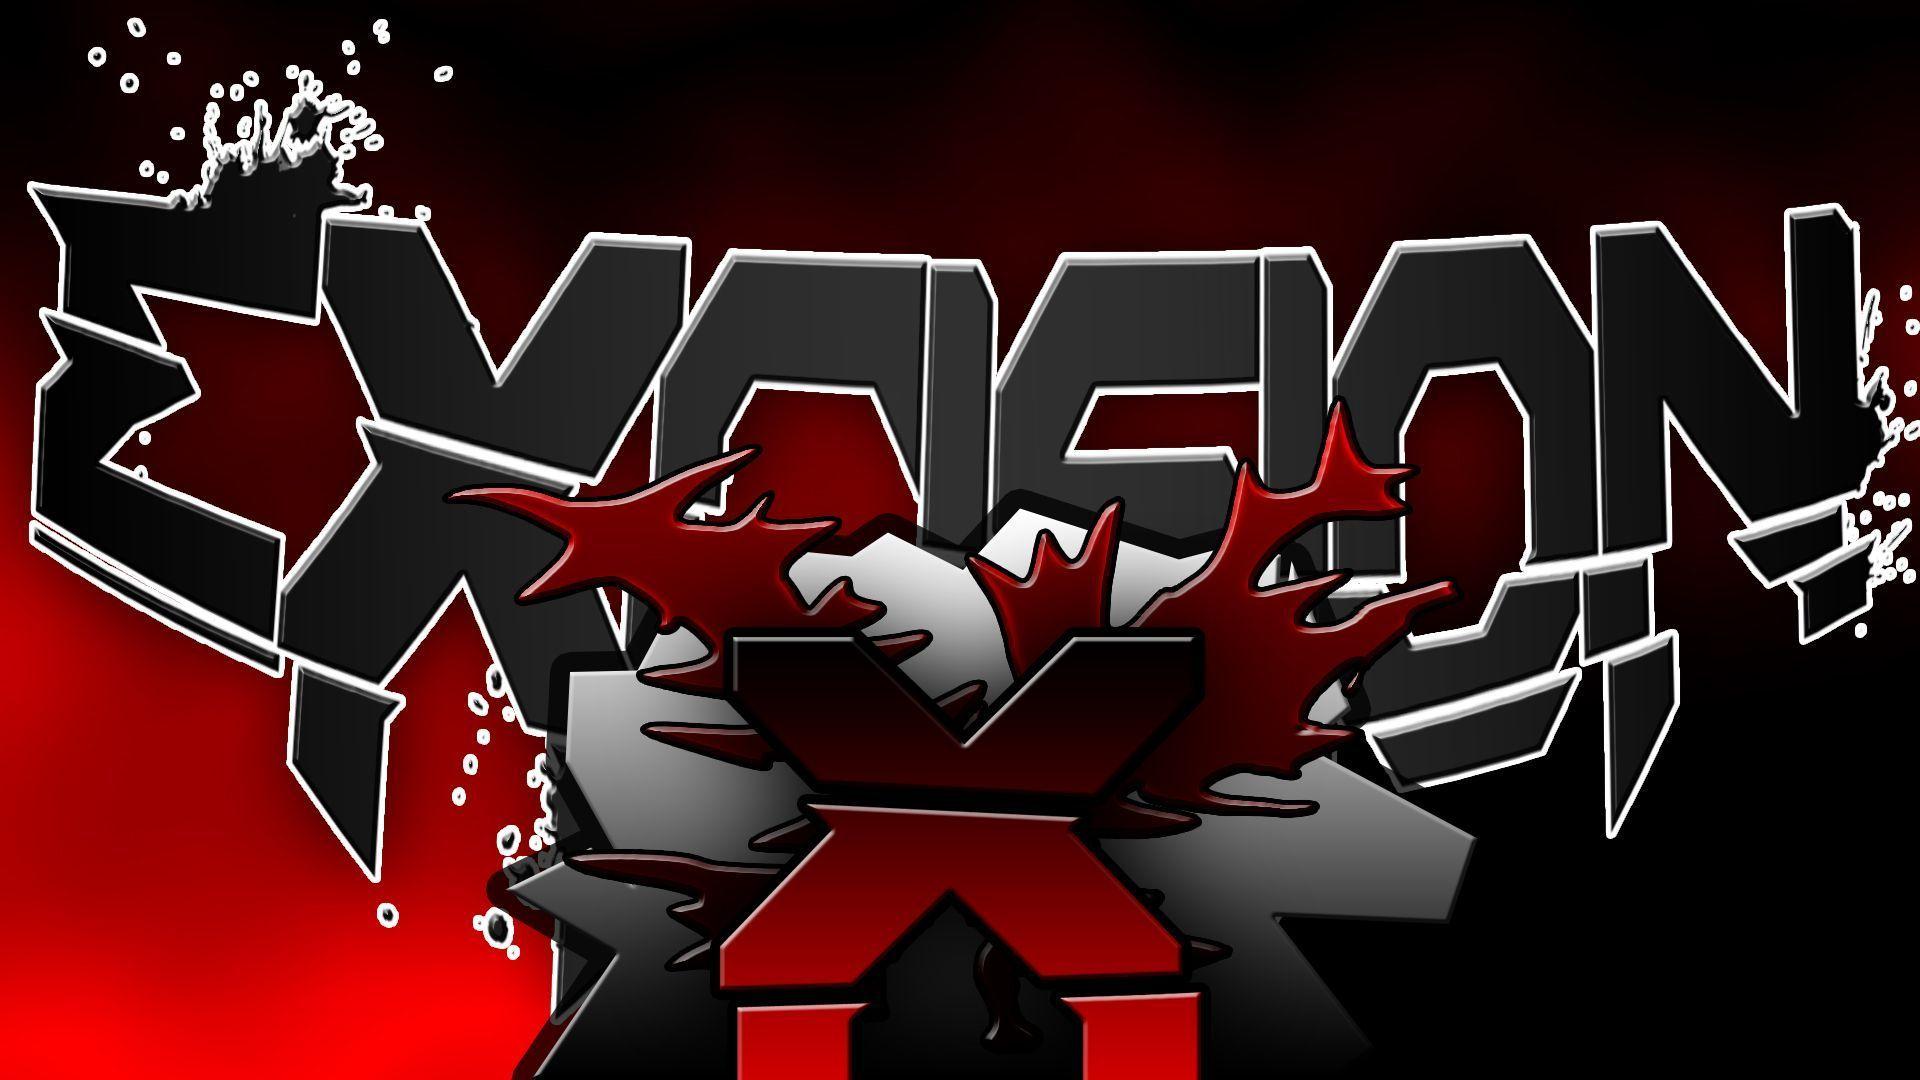 Excision Wallpapers - Wallpaper Cave - 1920 x 1080 jpeg 159kB